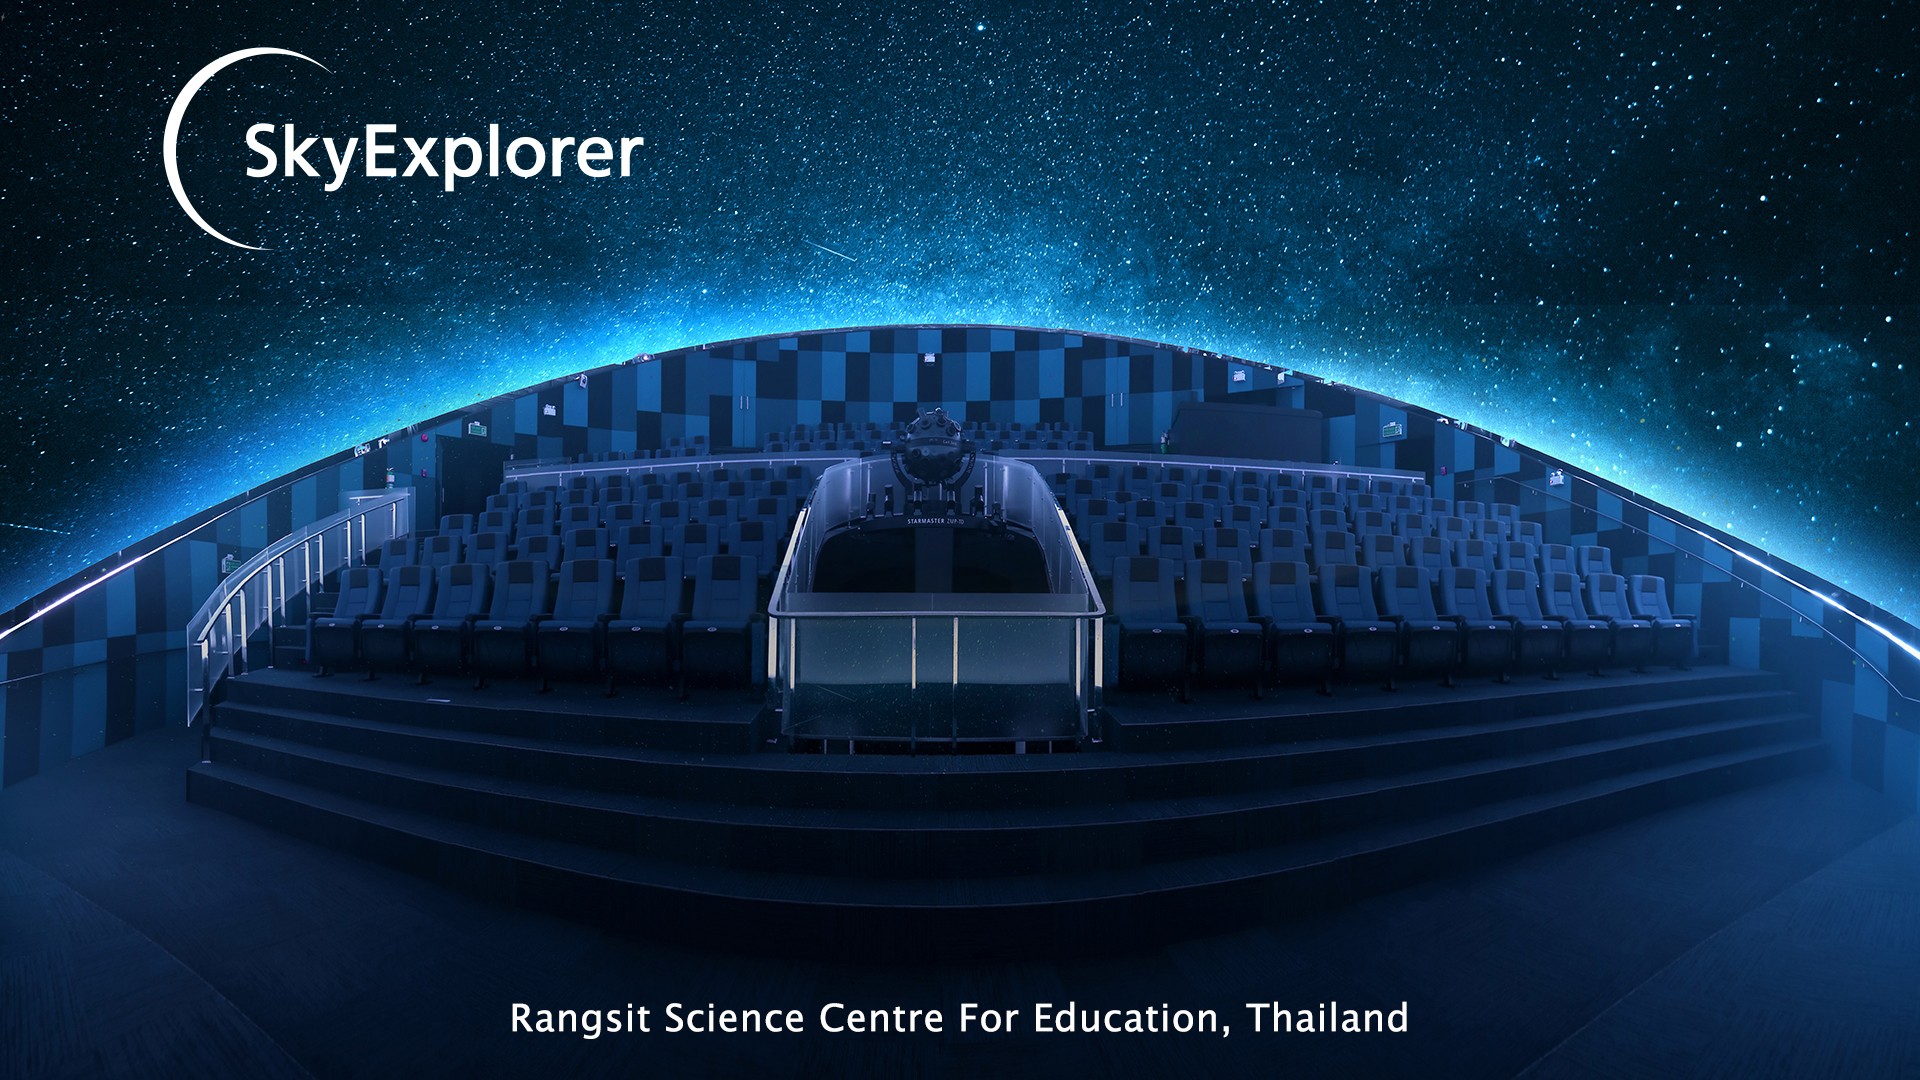 Rangsit Science Centre For Education